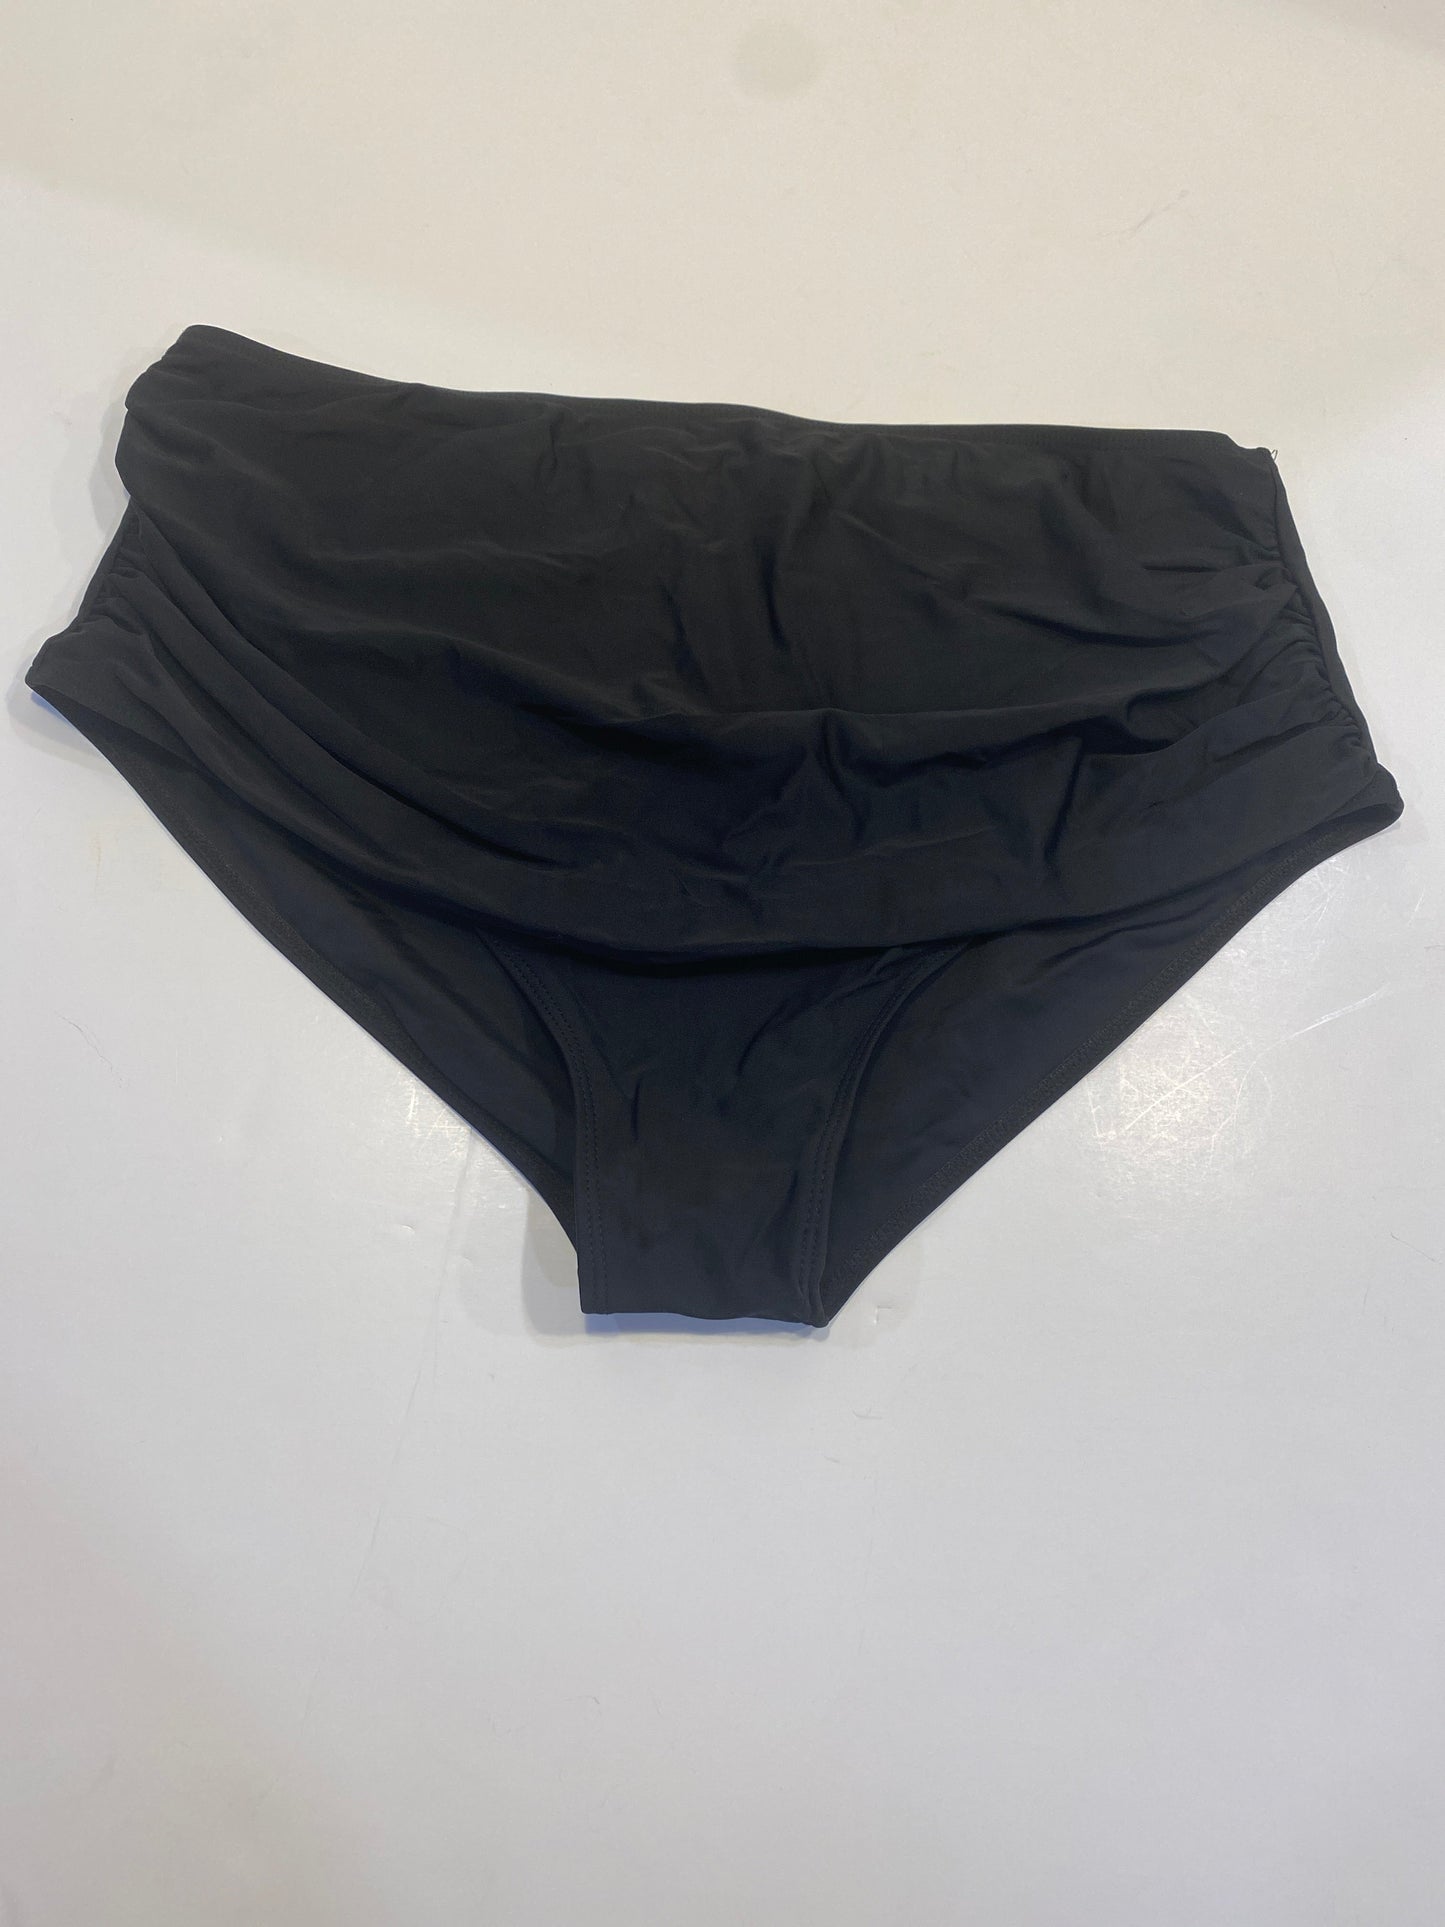 Black Swimsuit Bottom Clothes Mentor, Size 2x